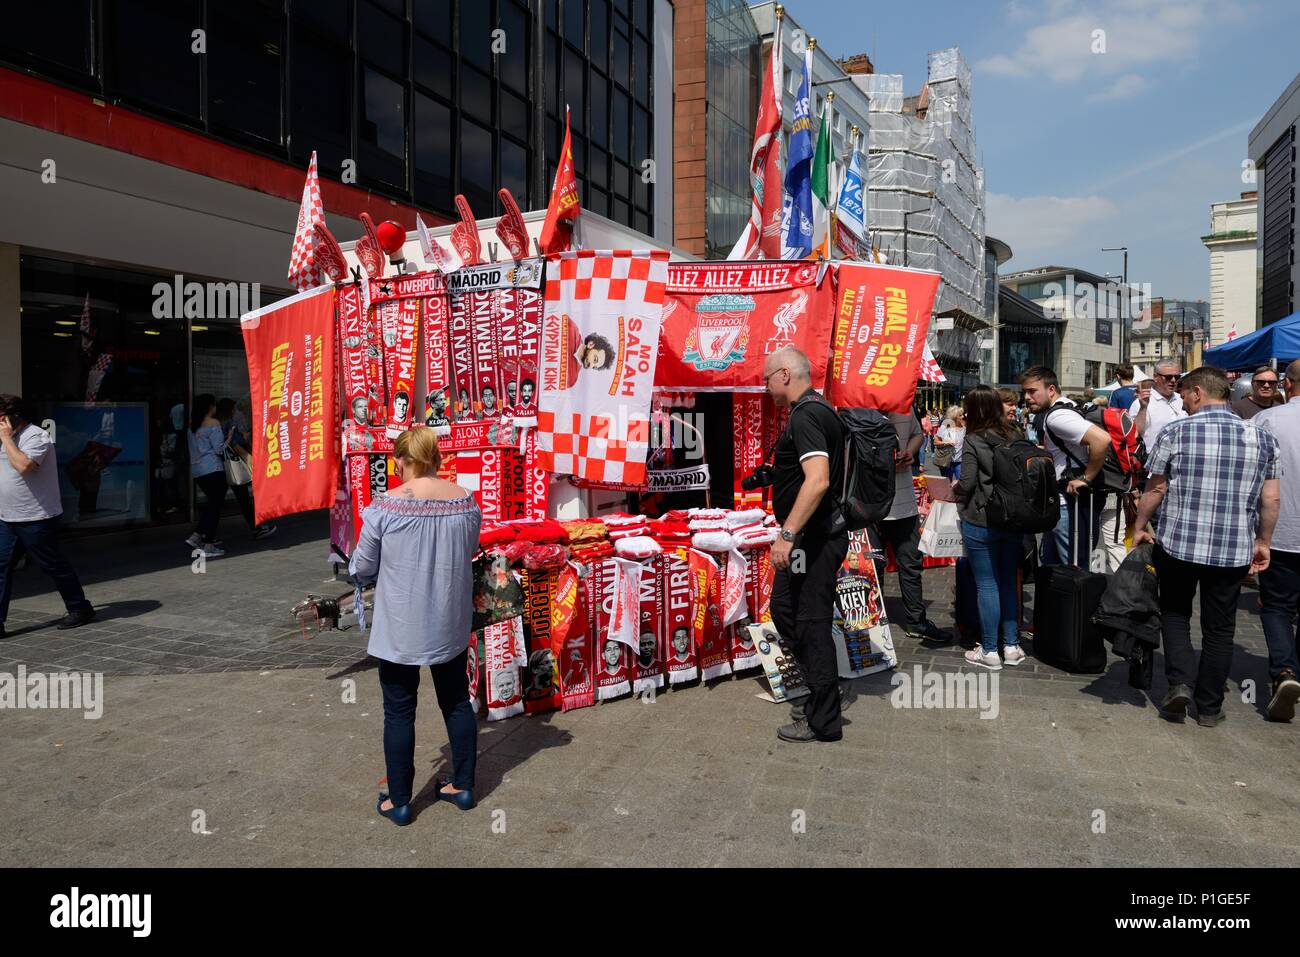 A trader operating a Liverpool football club merchandise stall in Liverpool city centre, England, UK Stock Photo